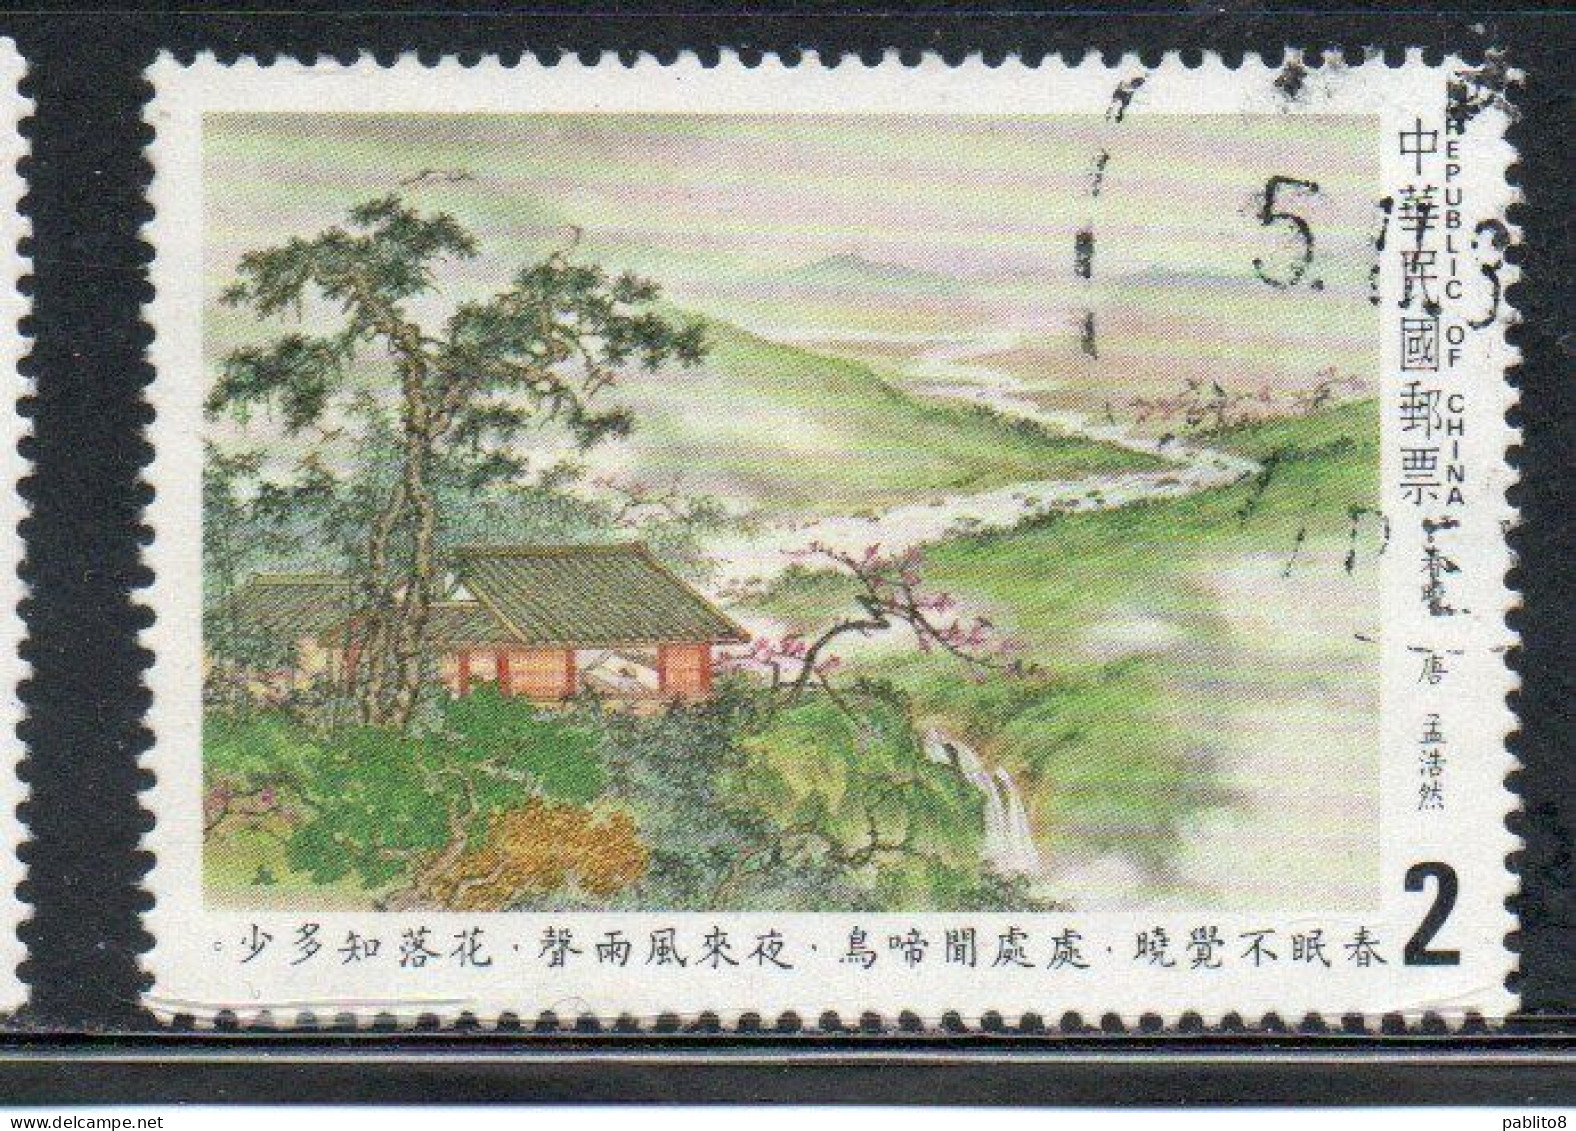 CHINA REPUBLIC CINA TAIWAN FORMOSA 1983 SUNG DINASTY POETRY ILLUSTRATION SEEING THE FOWERS FADE AWAY 2$ USED USATO - Used Stamps